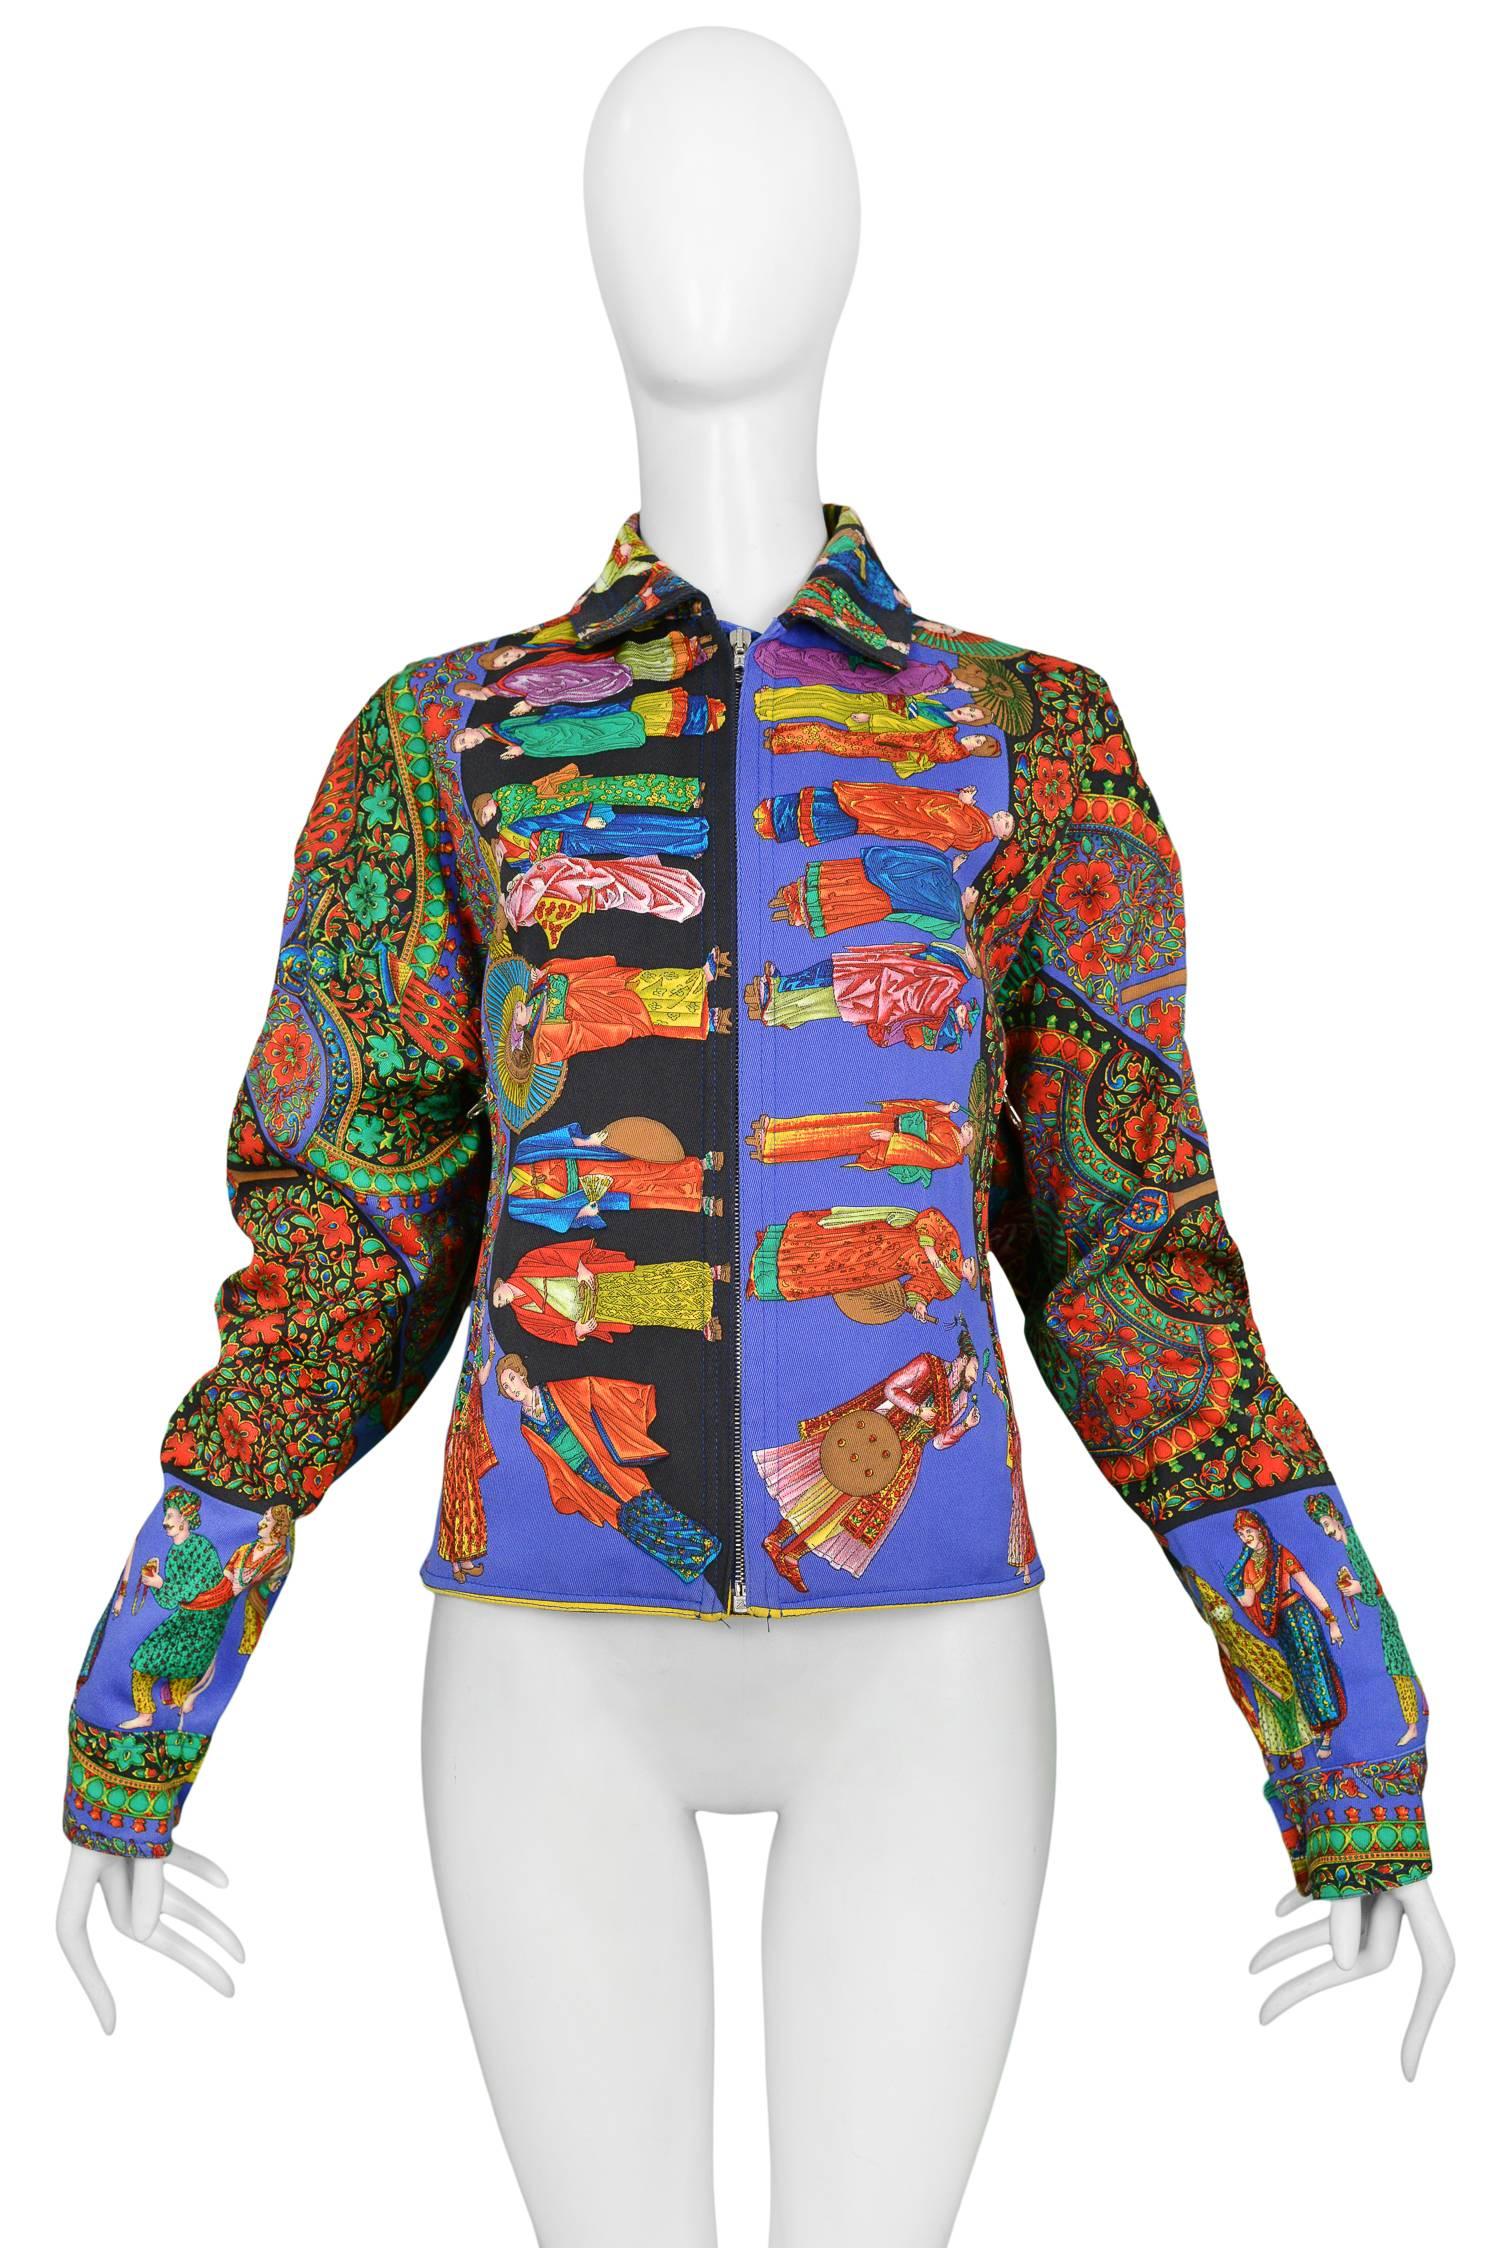 Multi color Gianni Versace vintage denim jacket with figurative and floral mixed print. Zipper front. Easy fit. 